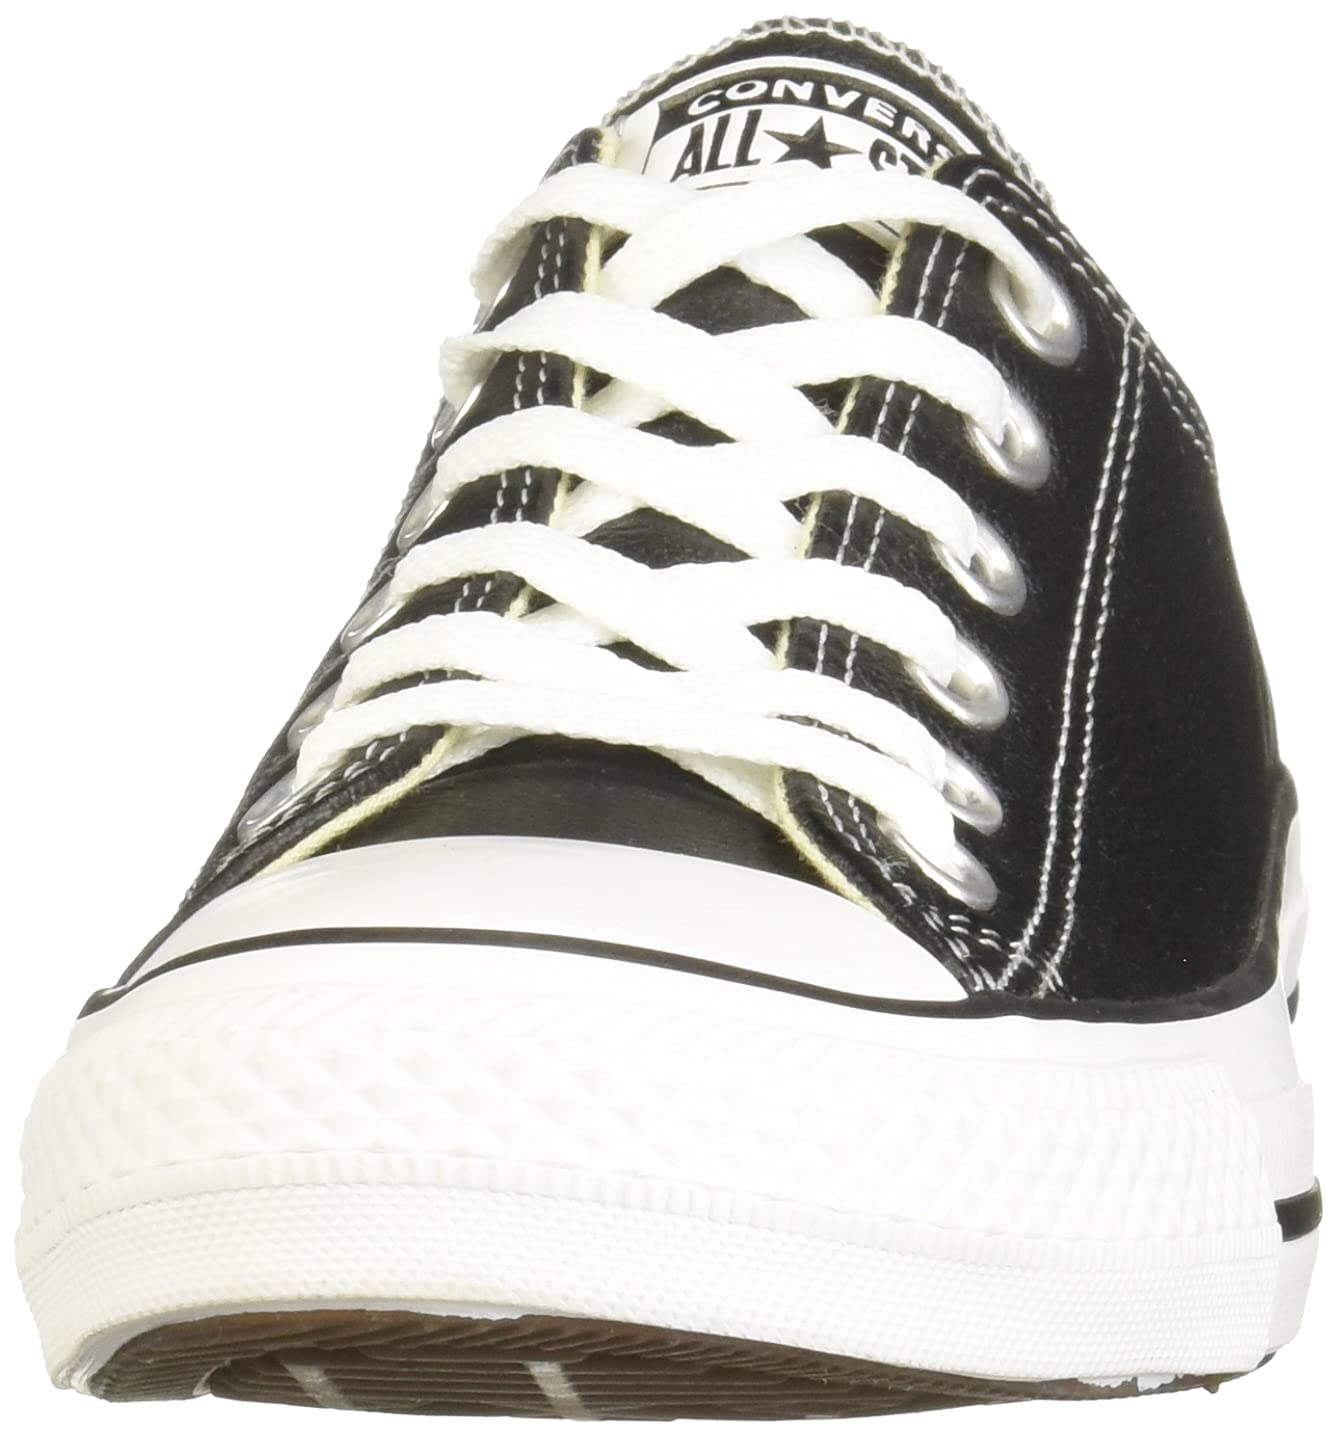 Converse Unisex-Child Infants' Chuck Taylor All Star Low Top Slip on Sneaker